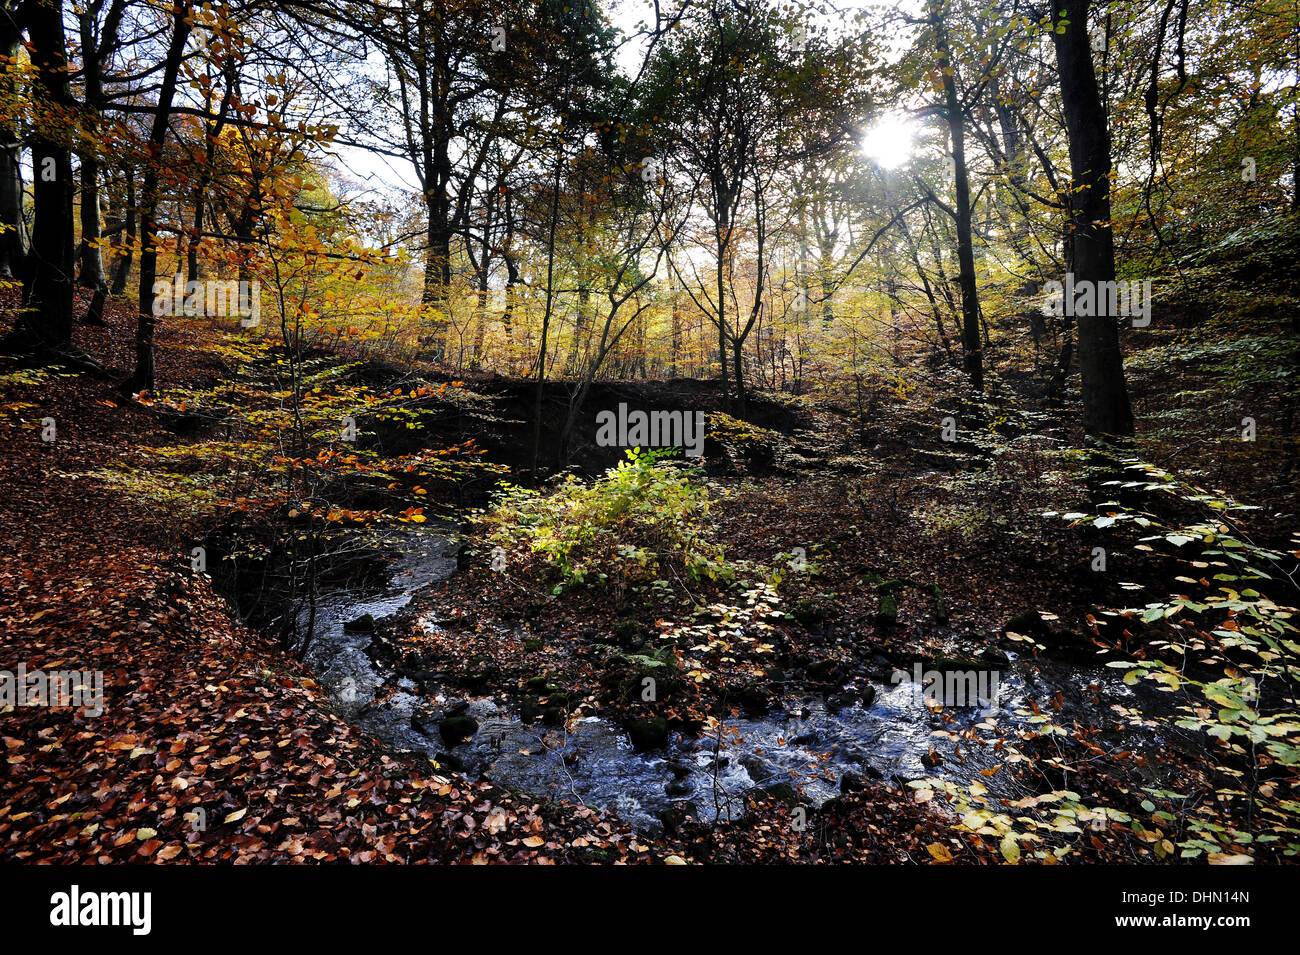 Autumnal scenes in Smithill's Hall woods, Bolton. Picture by Paul Heyes, Wednesday November 13, 2013. Stock Photo